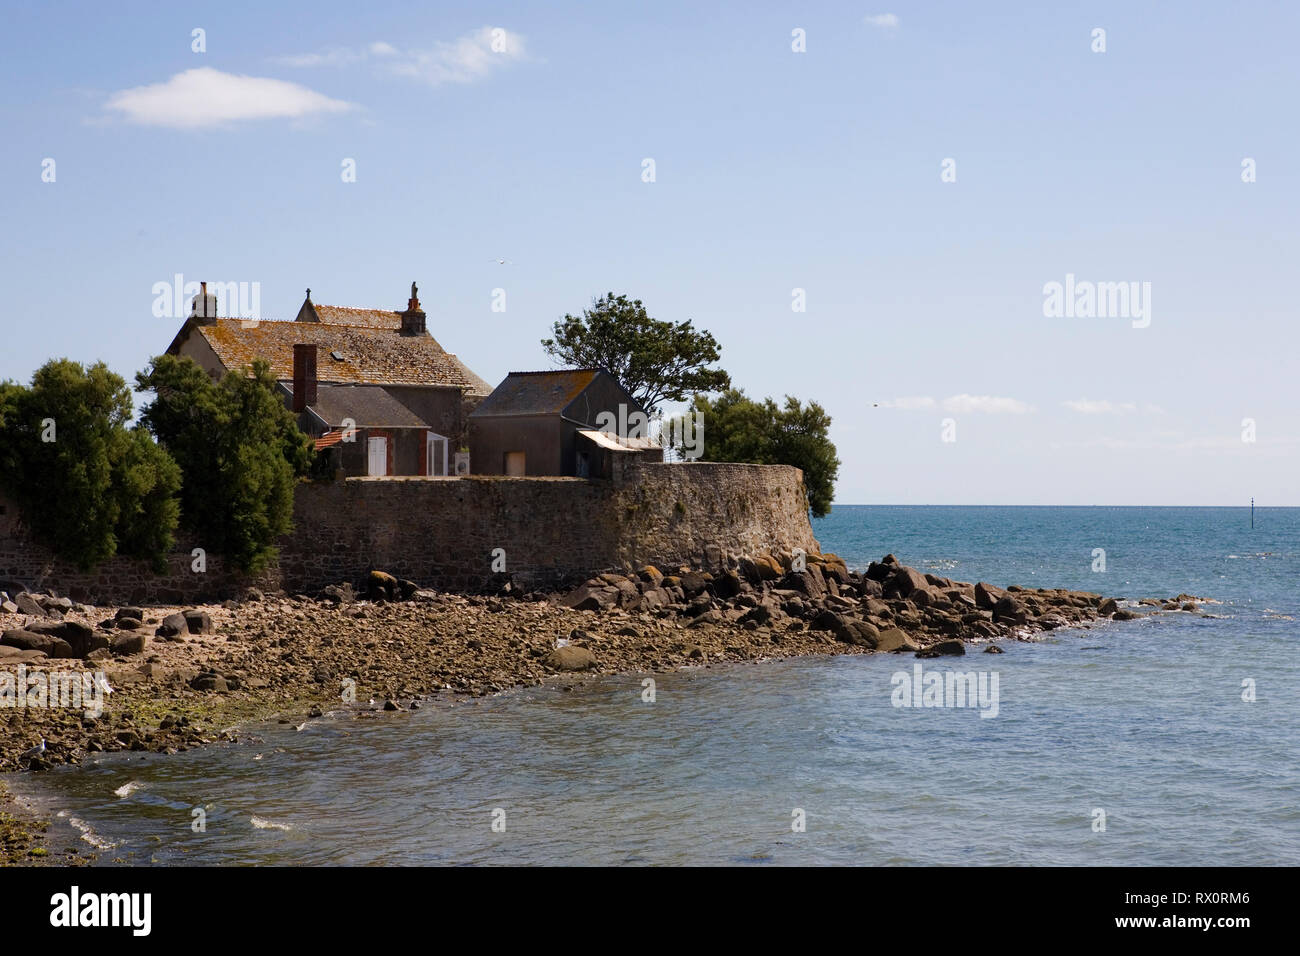 Cottage And Chapel By The Sea Saint Vaast La Hougue Normandy